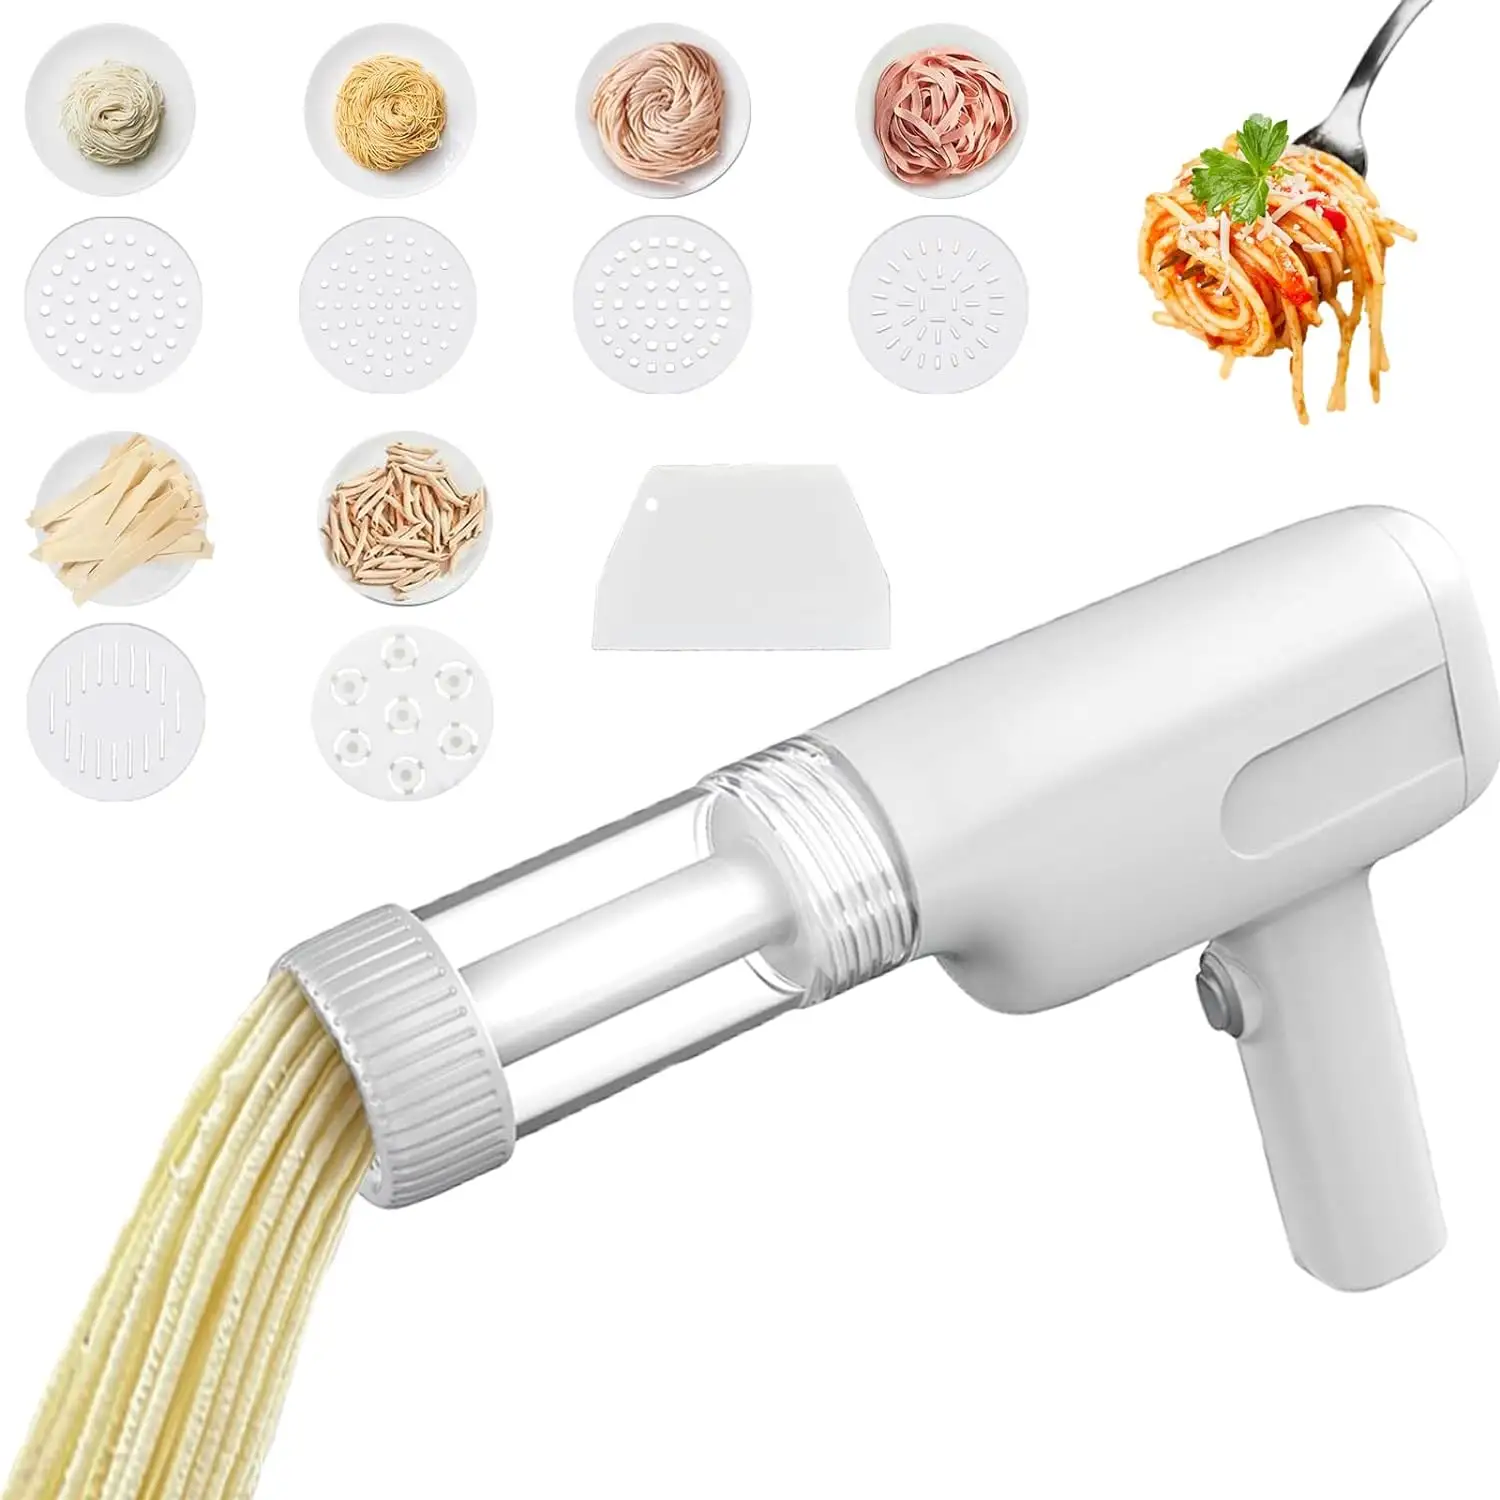 Portable Electric Automatic Pasta Maker Cordless Household Handheld Spaghetti Noodle Maker Machine